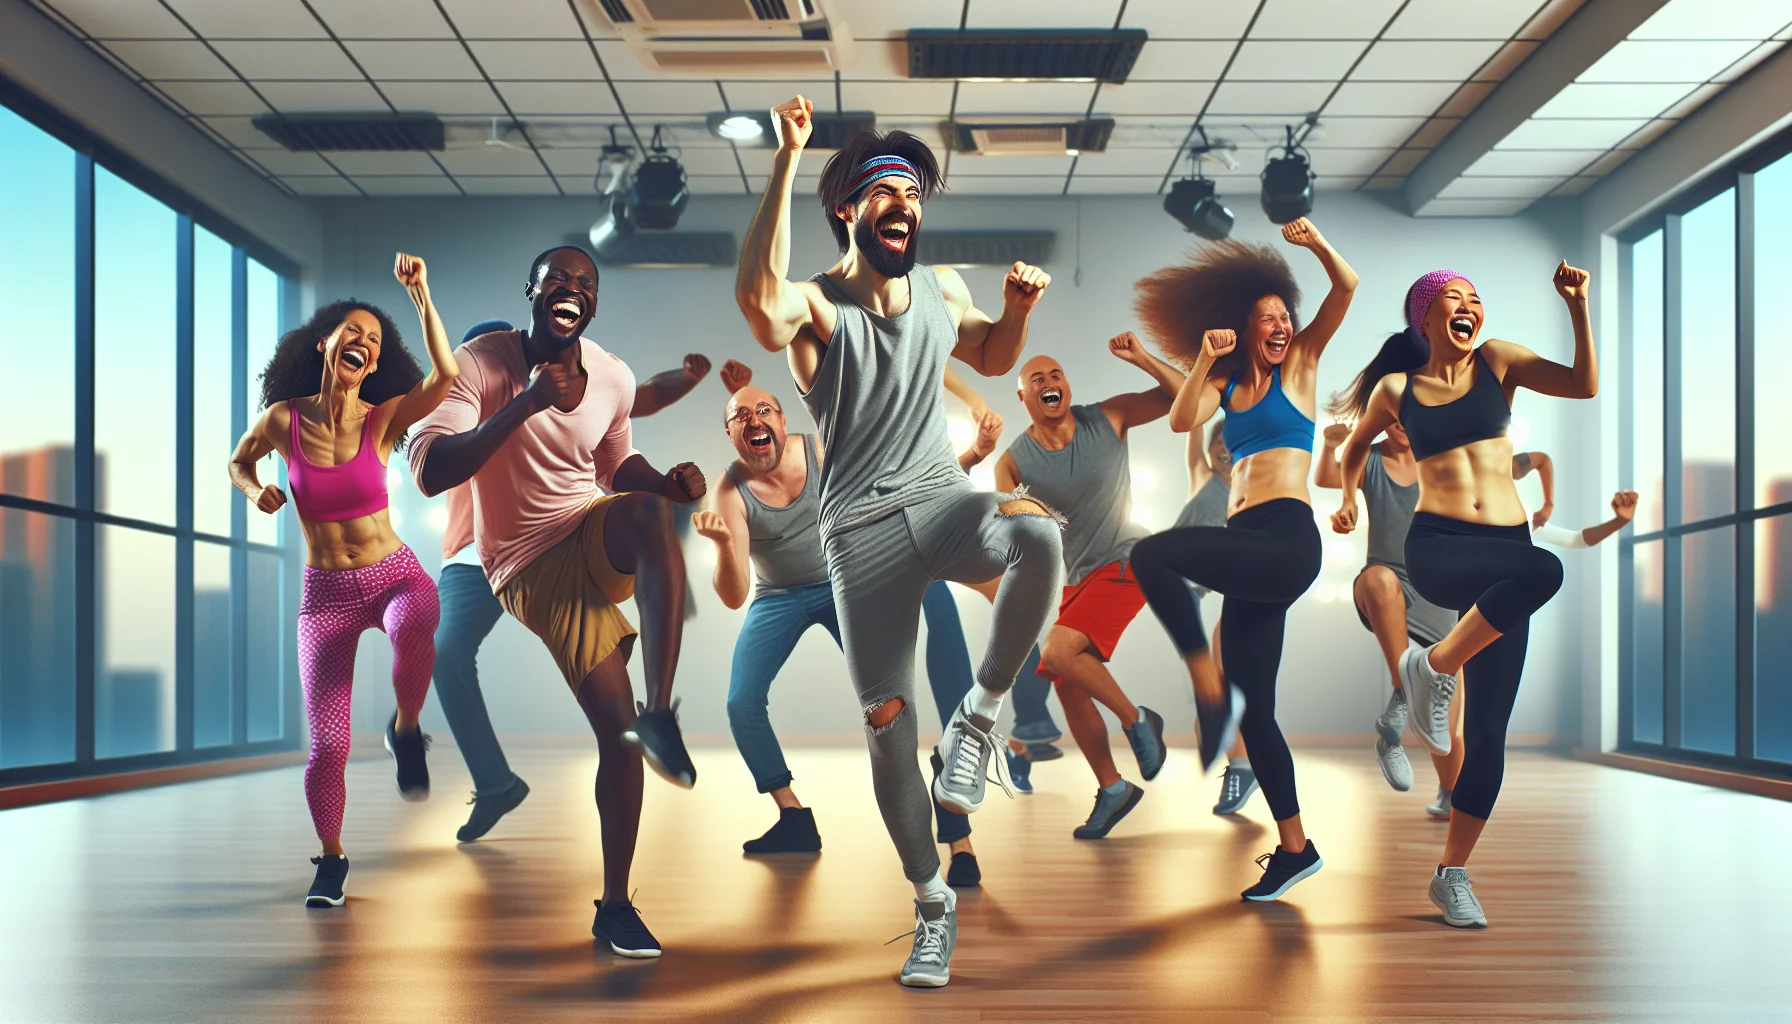 A comical scene at a Zumba fitness class, inspired by the rhythm of the song 'Can't Stop The Feeling'. A diverse group of people of varying genders and descents are joyously dancing away. Among the dancers, there's a Middle-Eastern man doing a funny but energetic spin, a Black woman laughing while attempting a high kick, a Caucasian man grooving along with exaggerated expressions, a Hispanic woman chuckling while doing hip twists and a South Asian woman gaily doing jumping jacks. The light-hearted, energetic atmosphere of the scene is highly enticing and encourages even the spectators to join in the fun exercise.